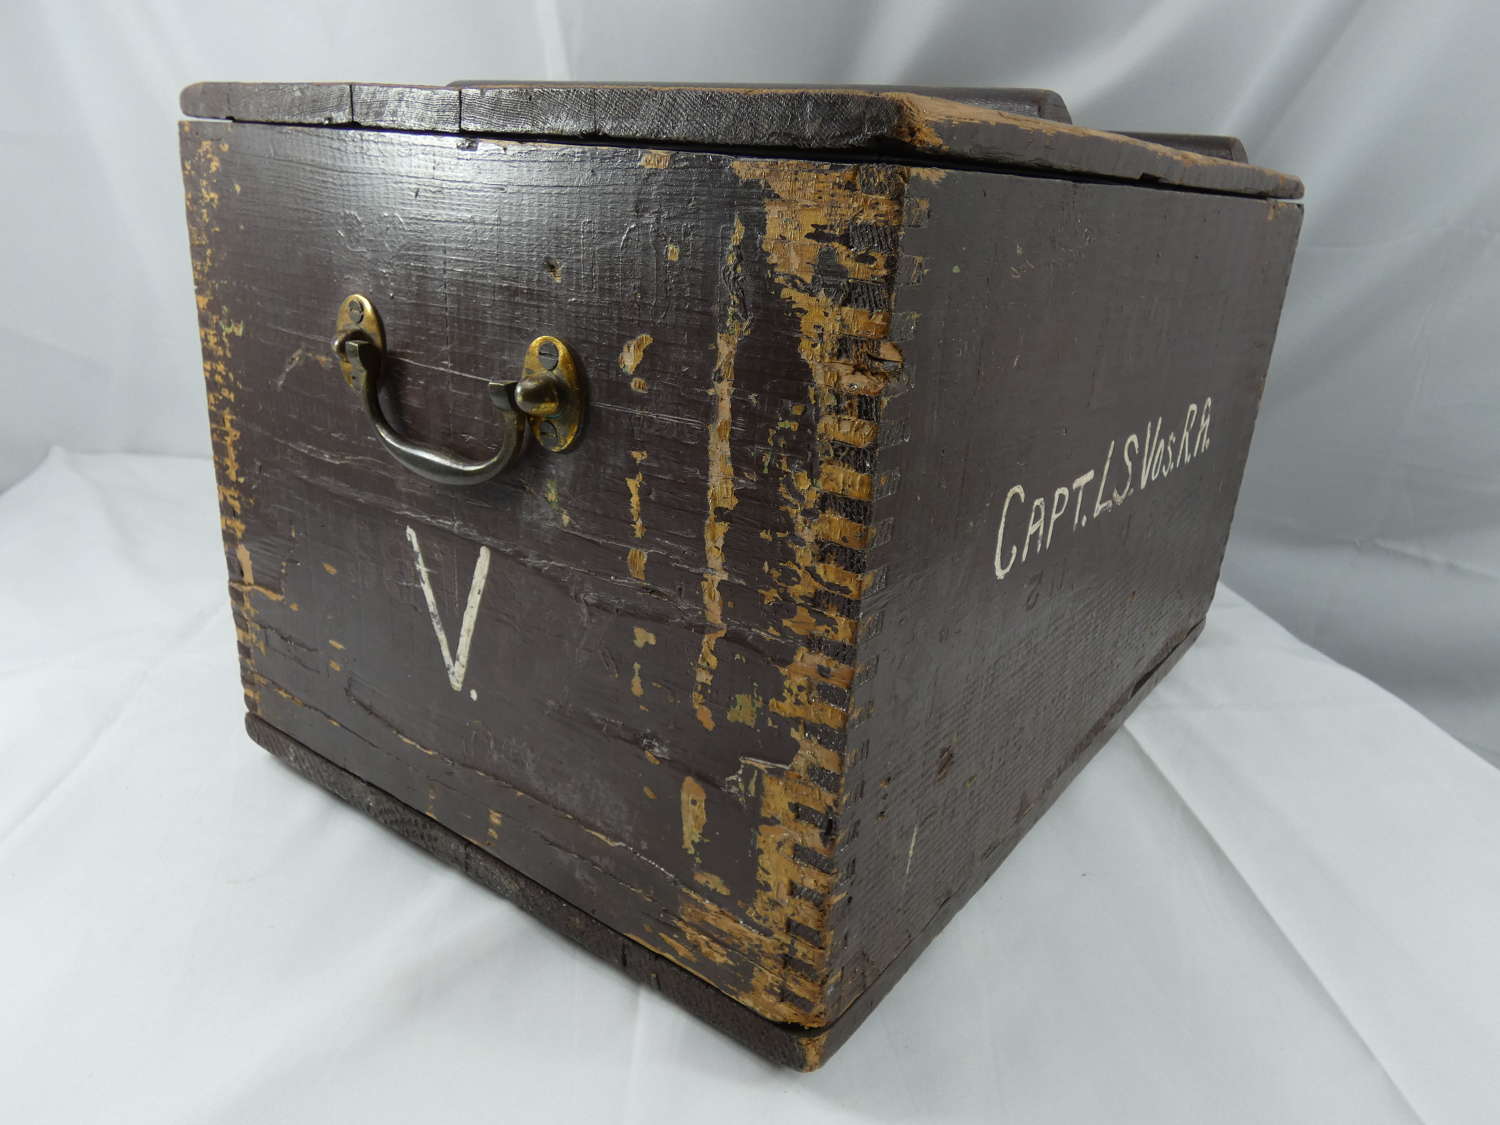 WW2 British Explosive Crate With Owners Name